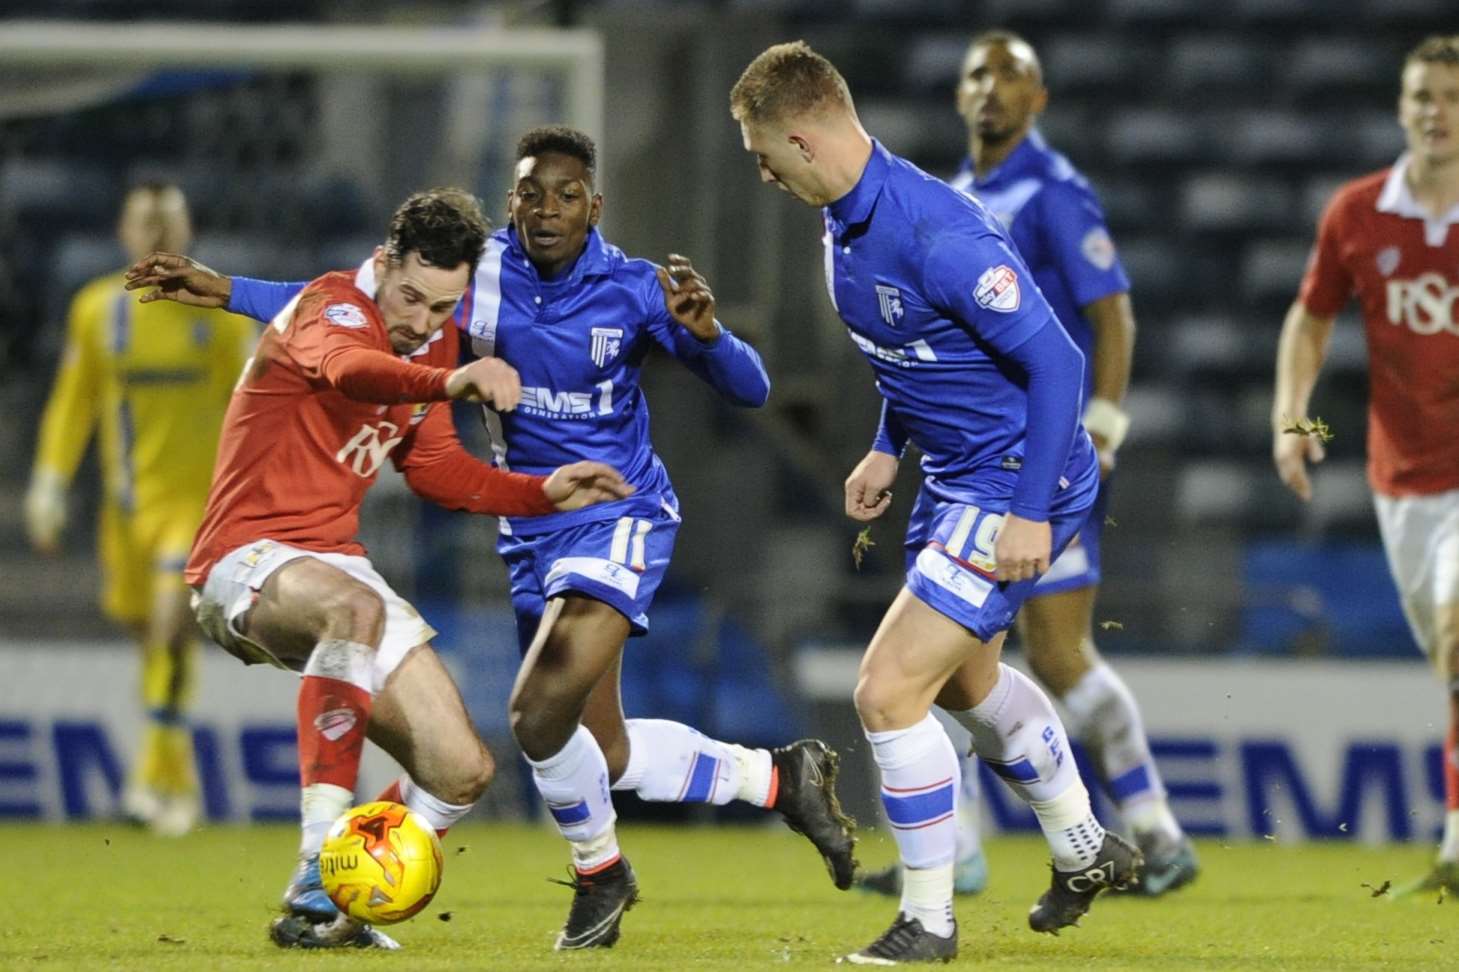 Jermaine McGlashan battles for possession but Gills lost 4-2 to Bristol City Picture: Barry Goodwin